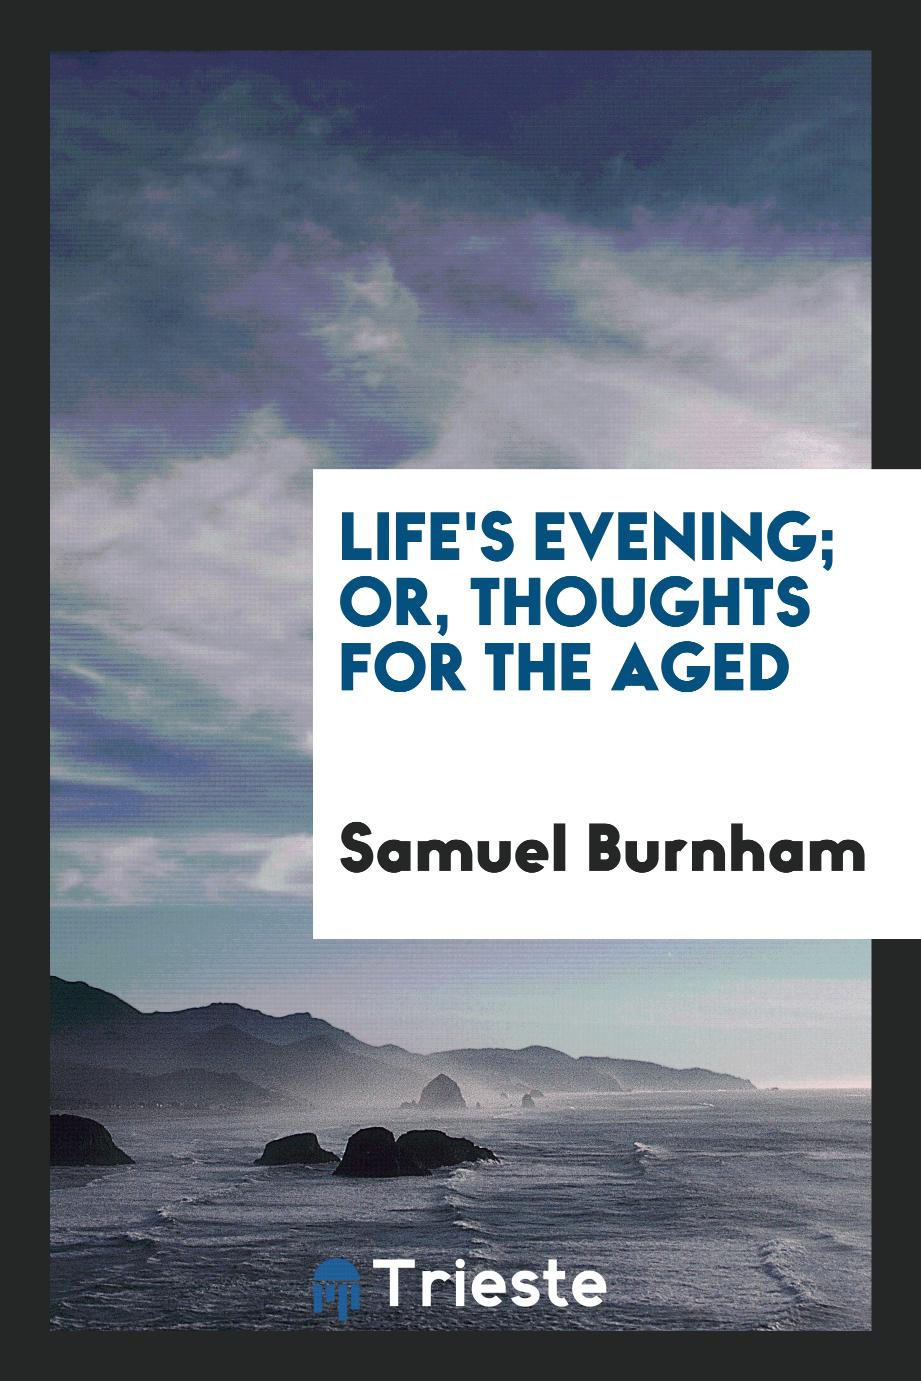 Life's evening; or, thoughts for the aged